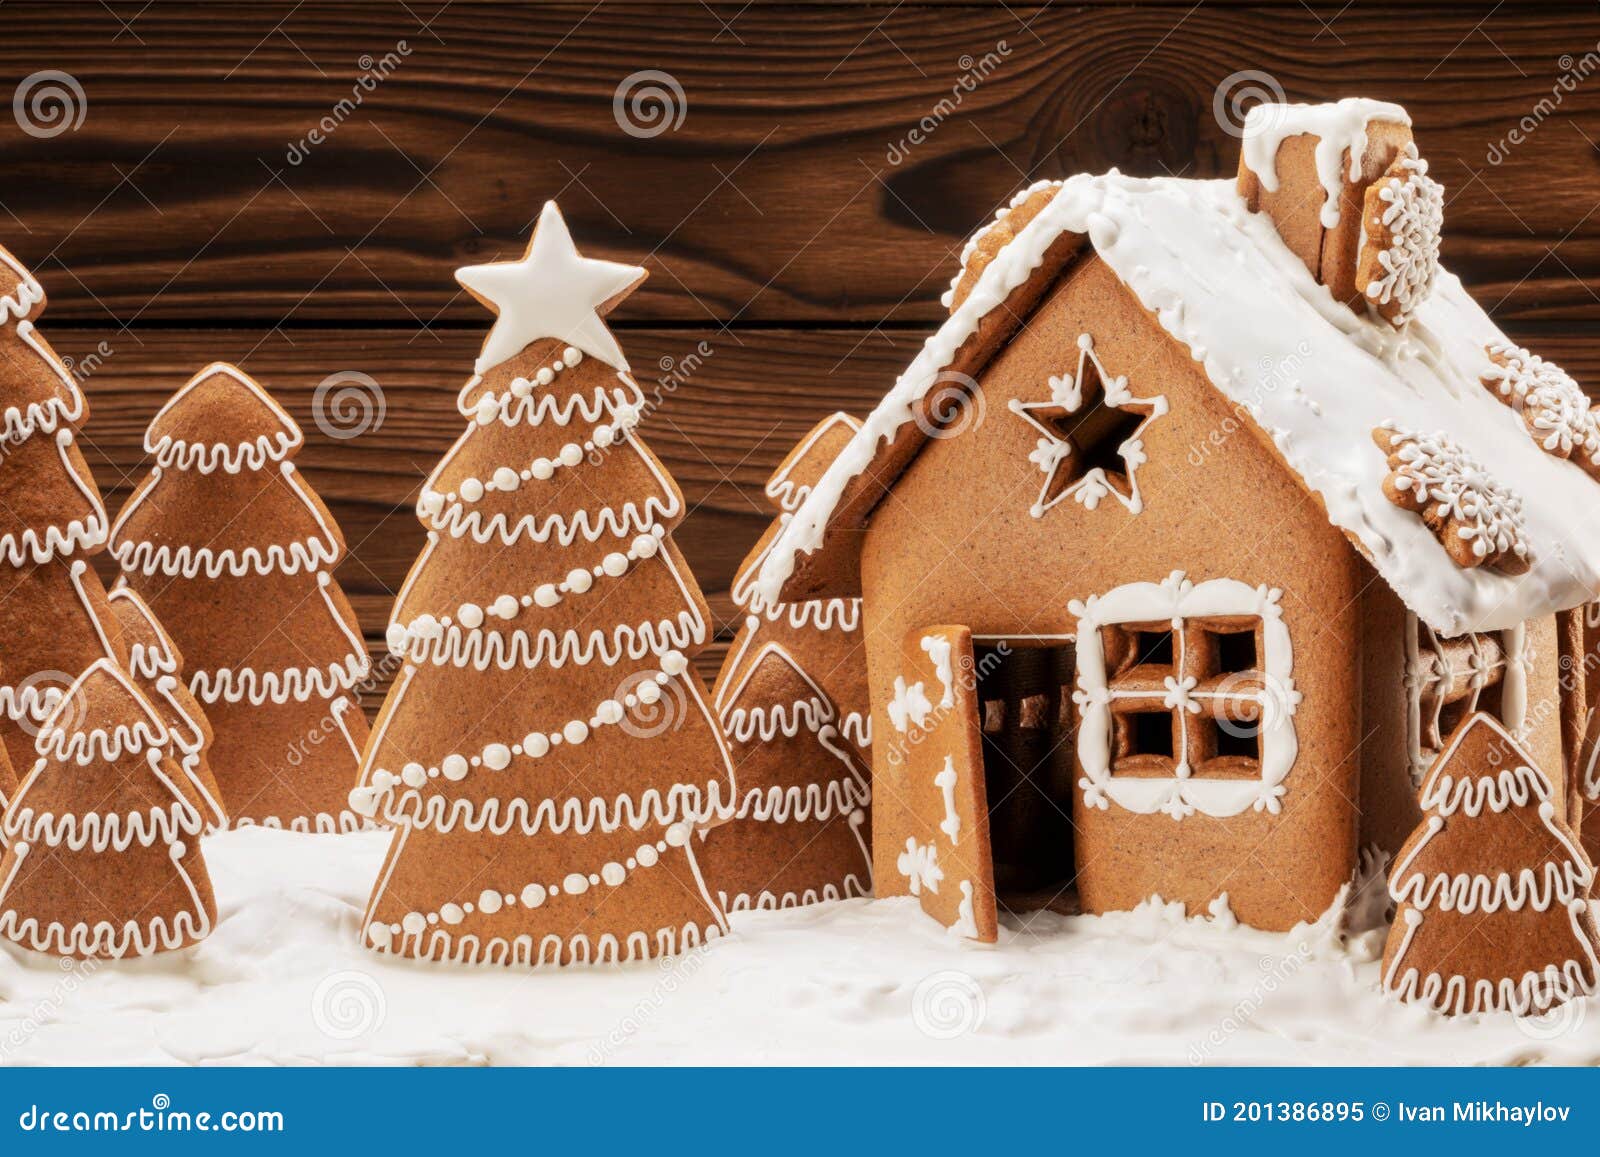 Gingerbread House and Trees Stock Image - Image of celebration, sugar ...